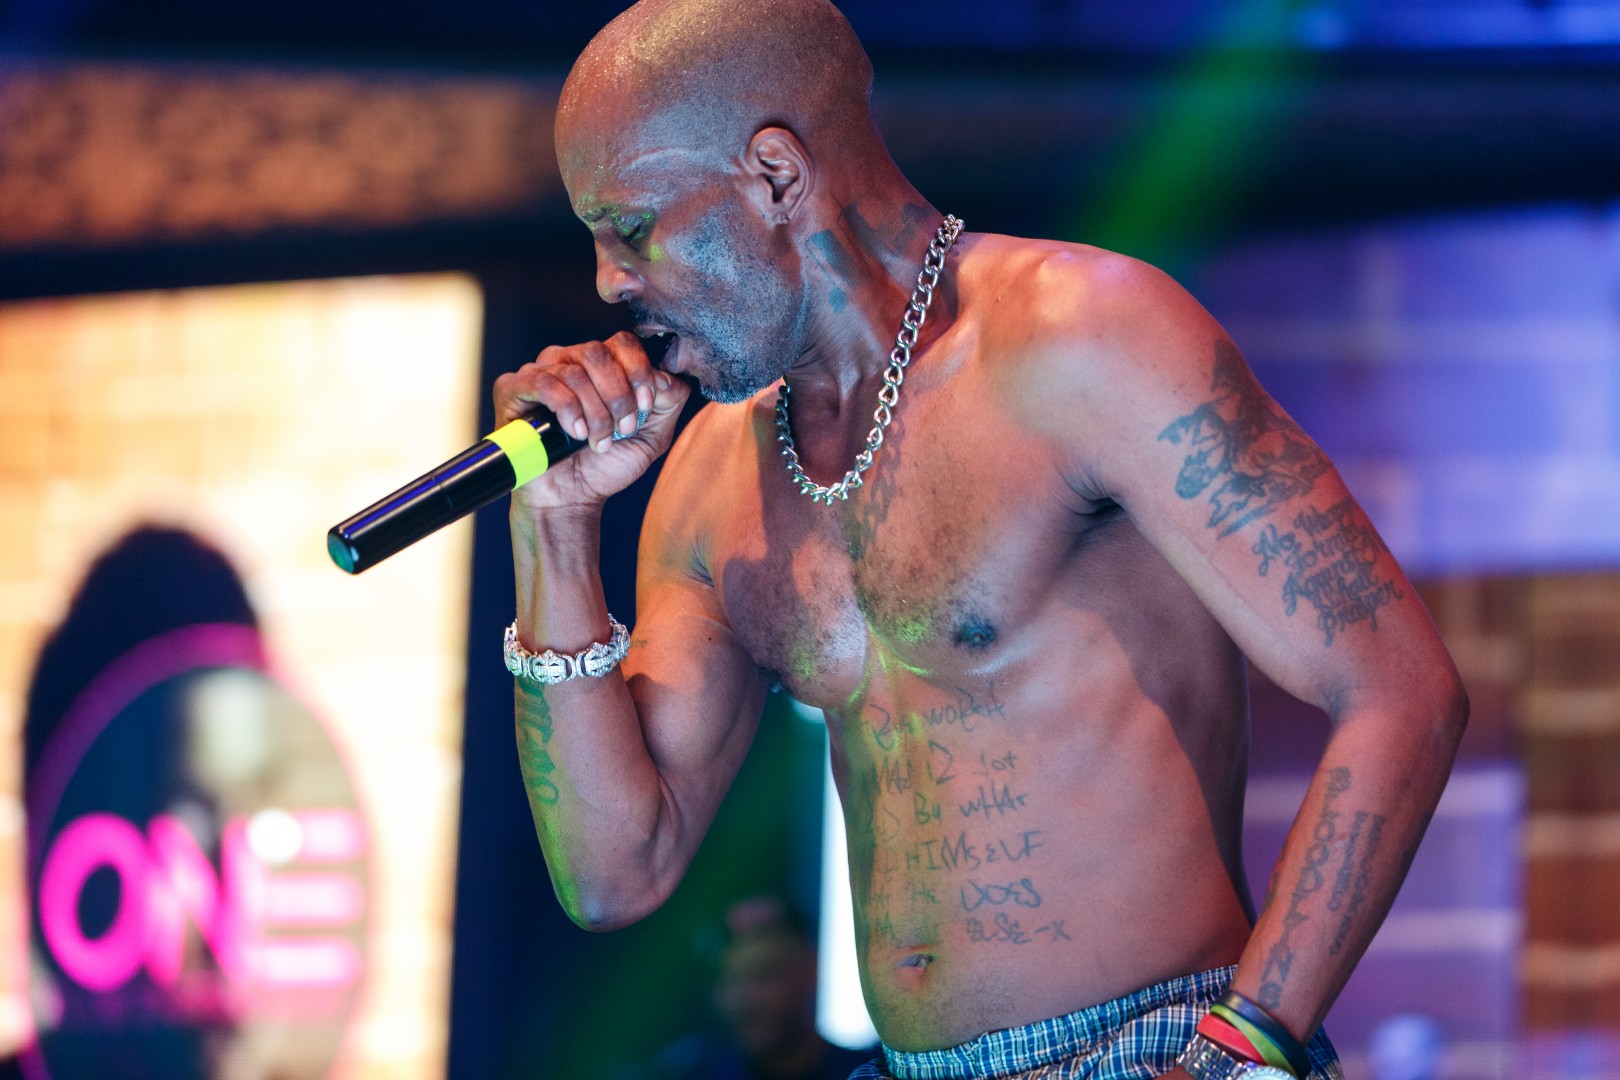 DMX at Club One in Bucharest on March 28, 2015 (1e60b01e00)